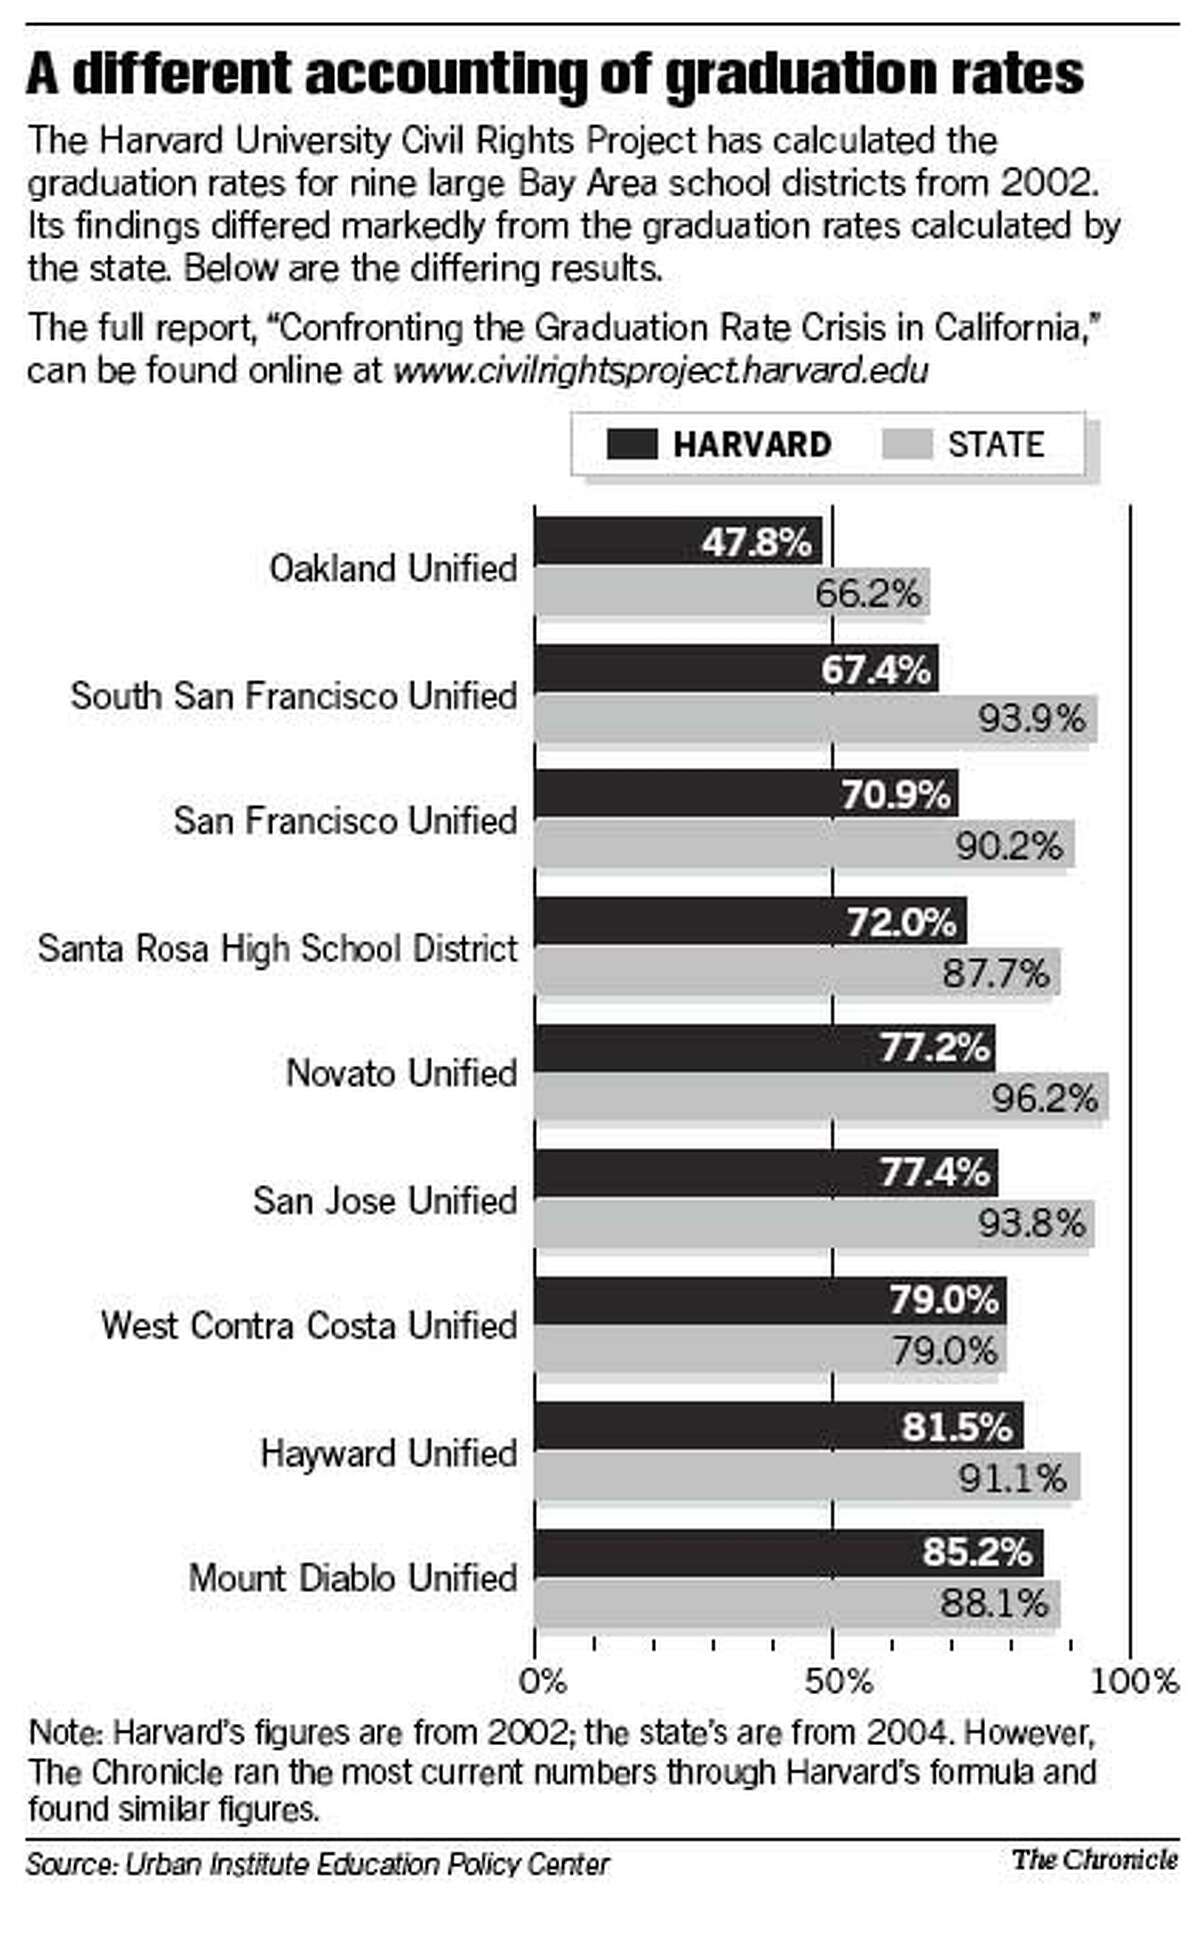 A Different Accounting of Graduation Rates. Chronicle Graphic